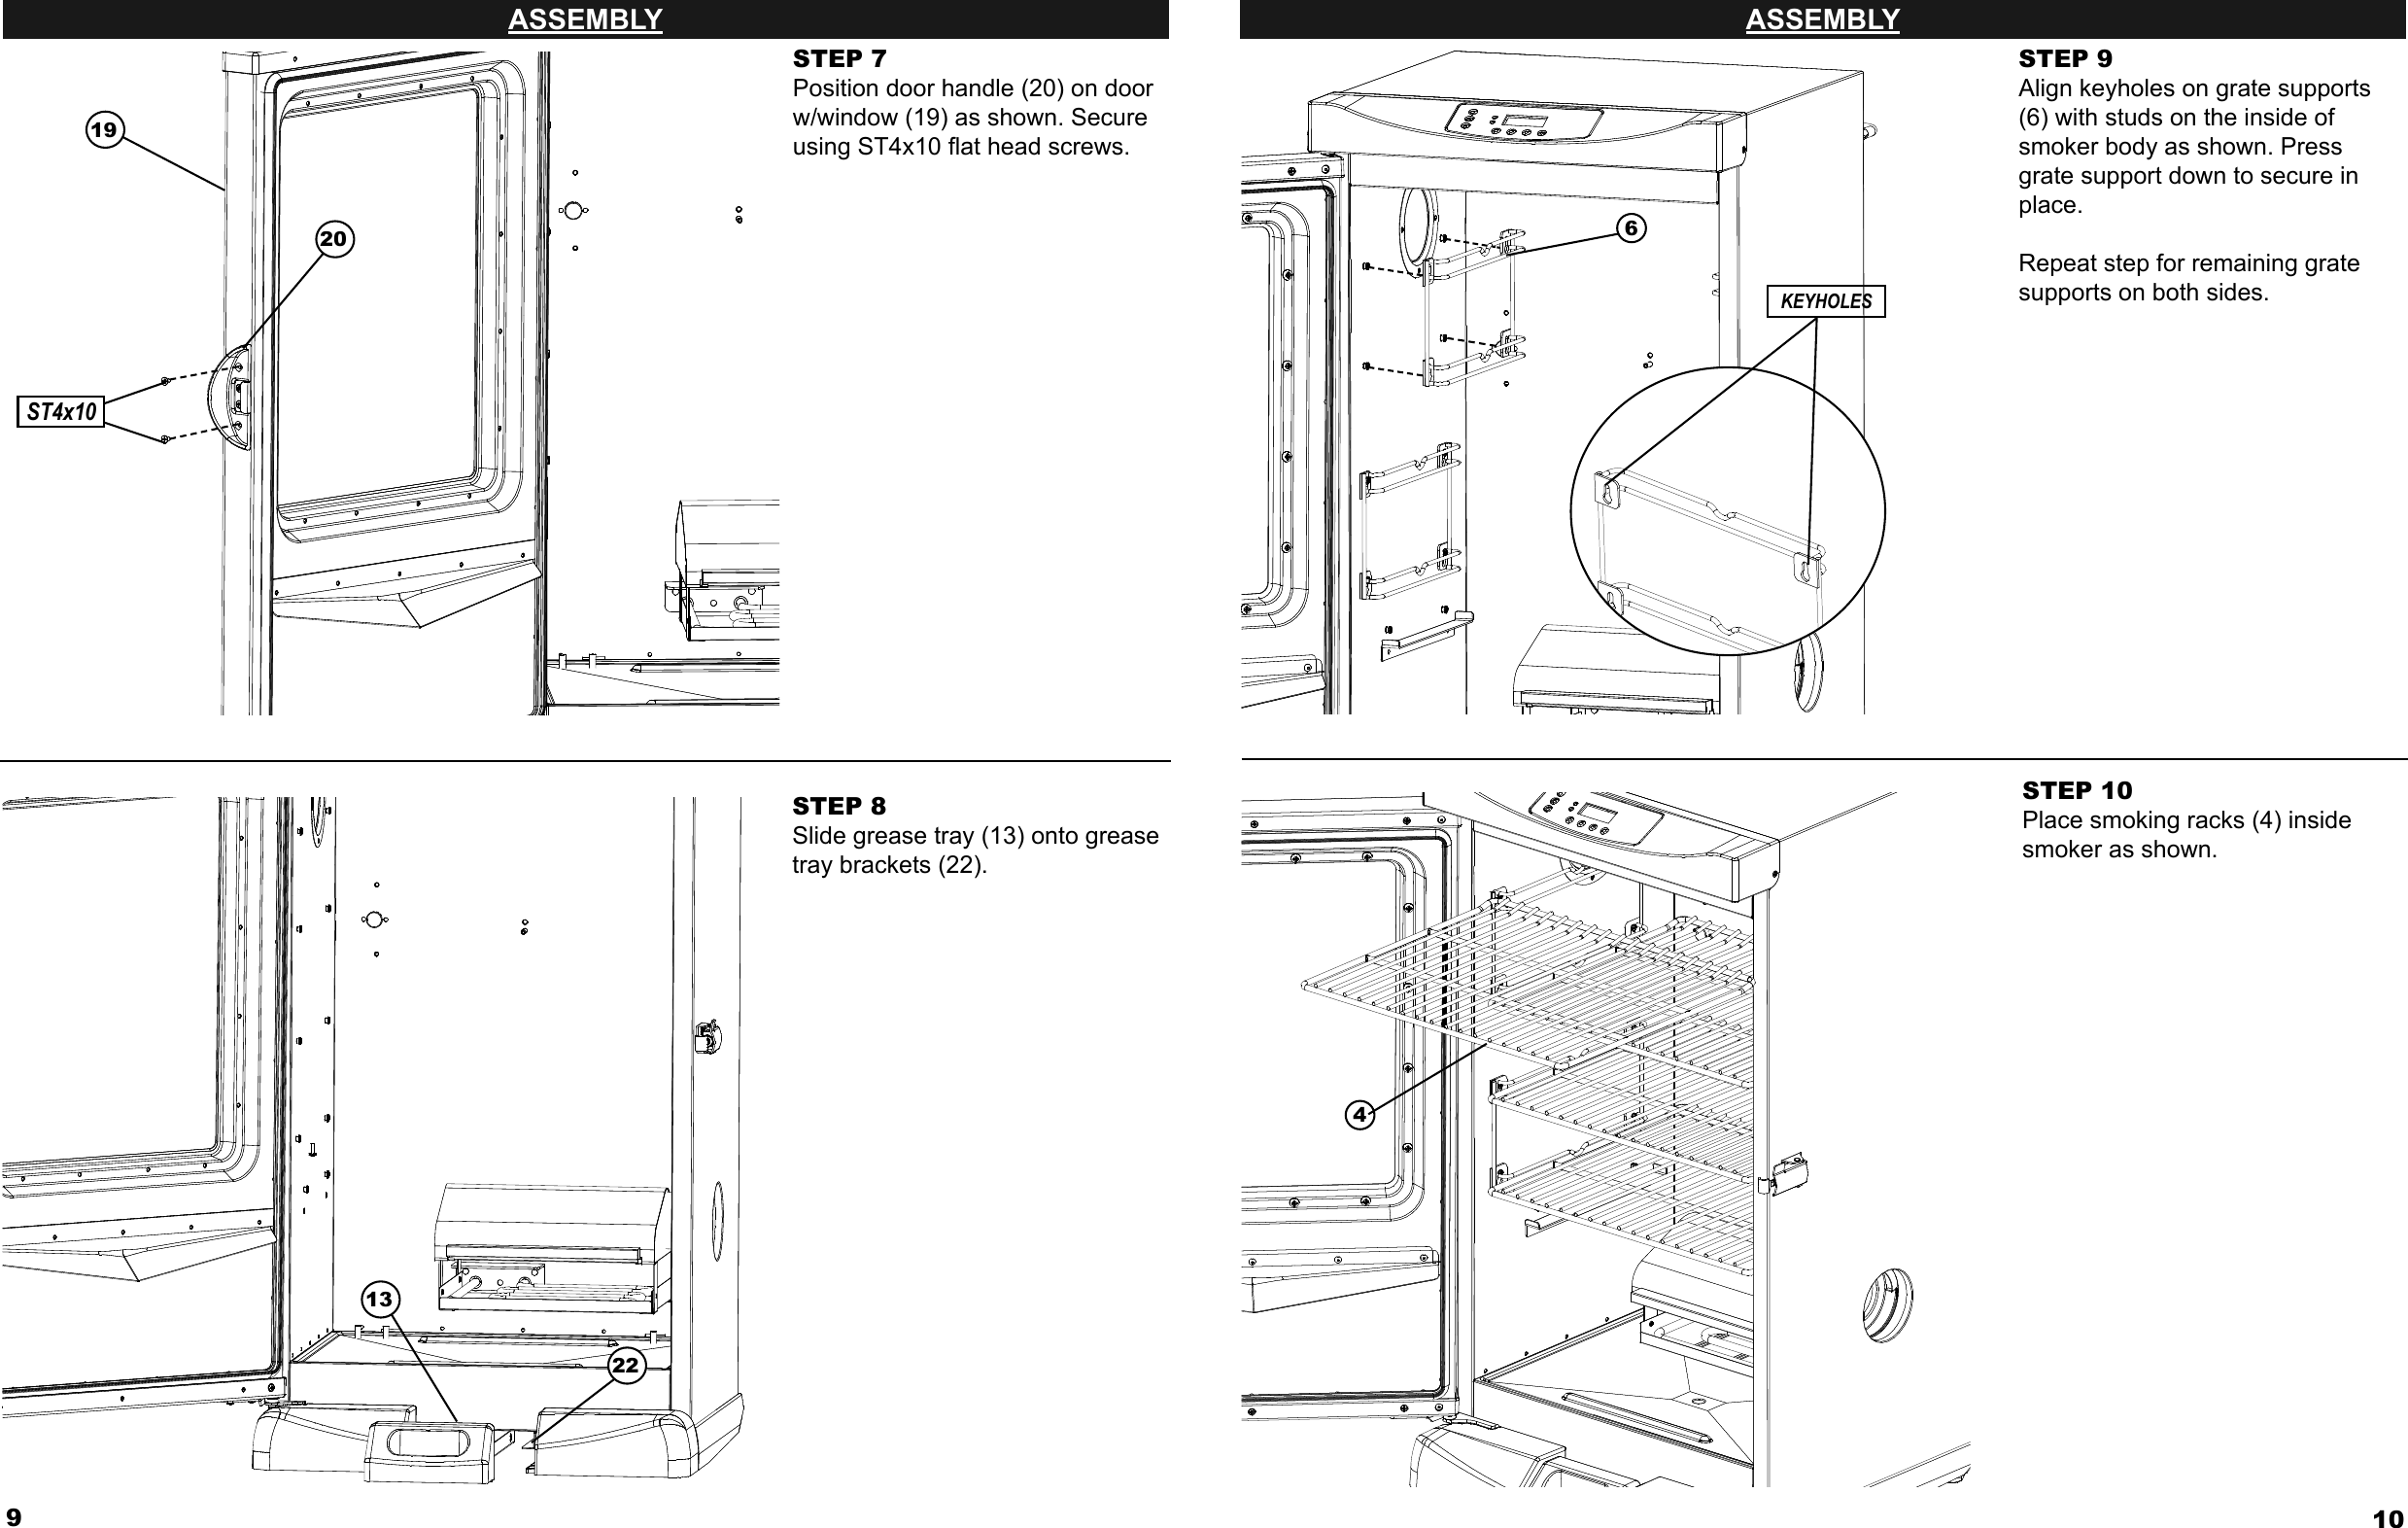 9ASSEMBLYSTEP 7Position door handle (20) on door w/window (19) as shown. Secure using ST4x10 ﬂ at head screws.STEP 8Slide grease tray (13) onto grease tray brackets (22).20191322ST4x1010ASSEMBLYSTEP 9Align keyholes on grate supports (6) with studs on the inside of smoker body as shown. Press grate support down to secure in place.Repeat step for remaining grate supports on both sides.STEP 10Place smoking racks (4) inside smoker as shown.64KEYHOLES